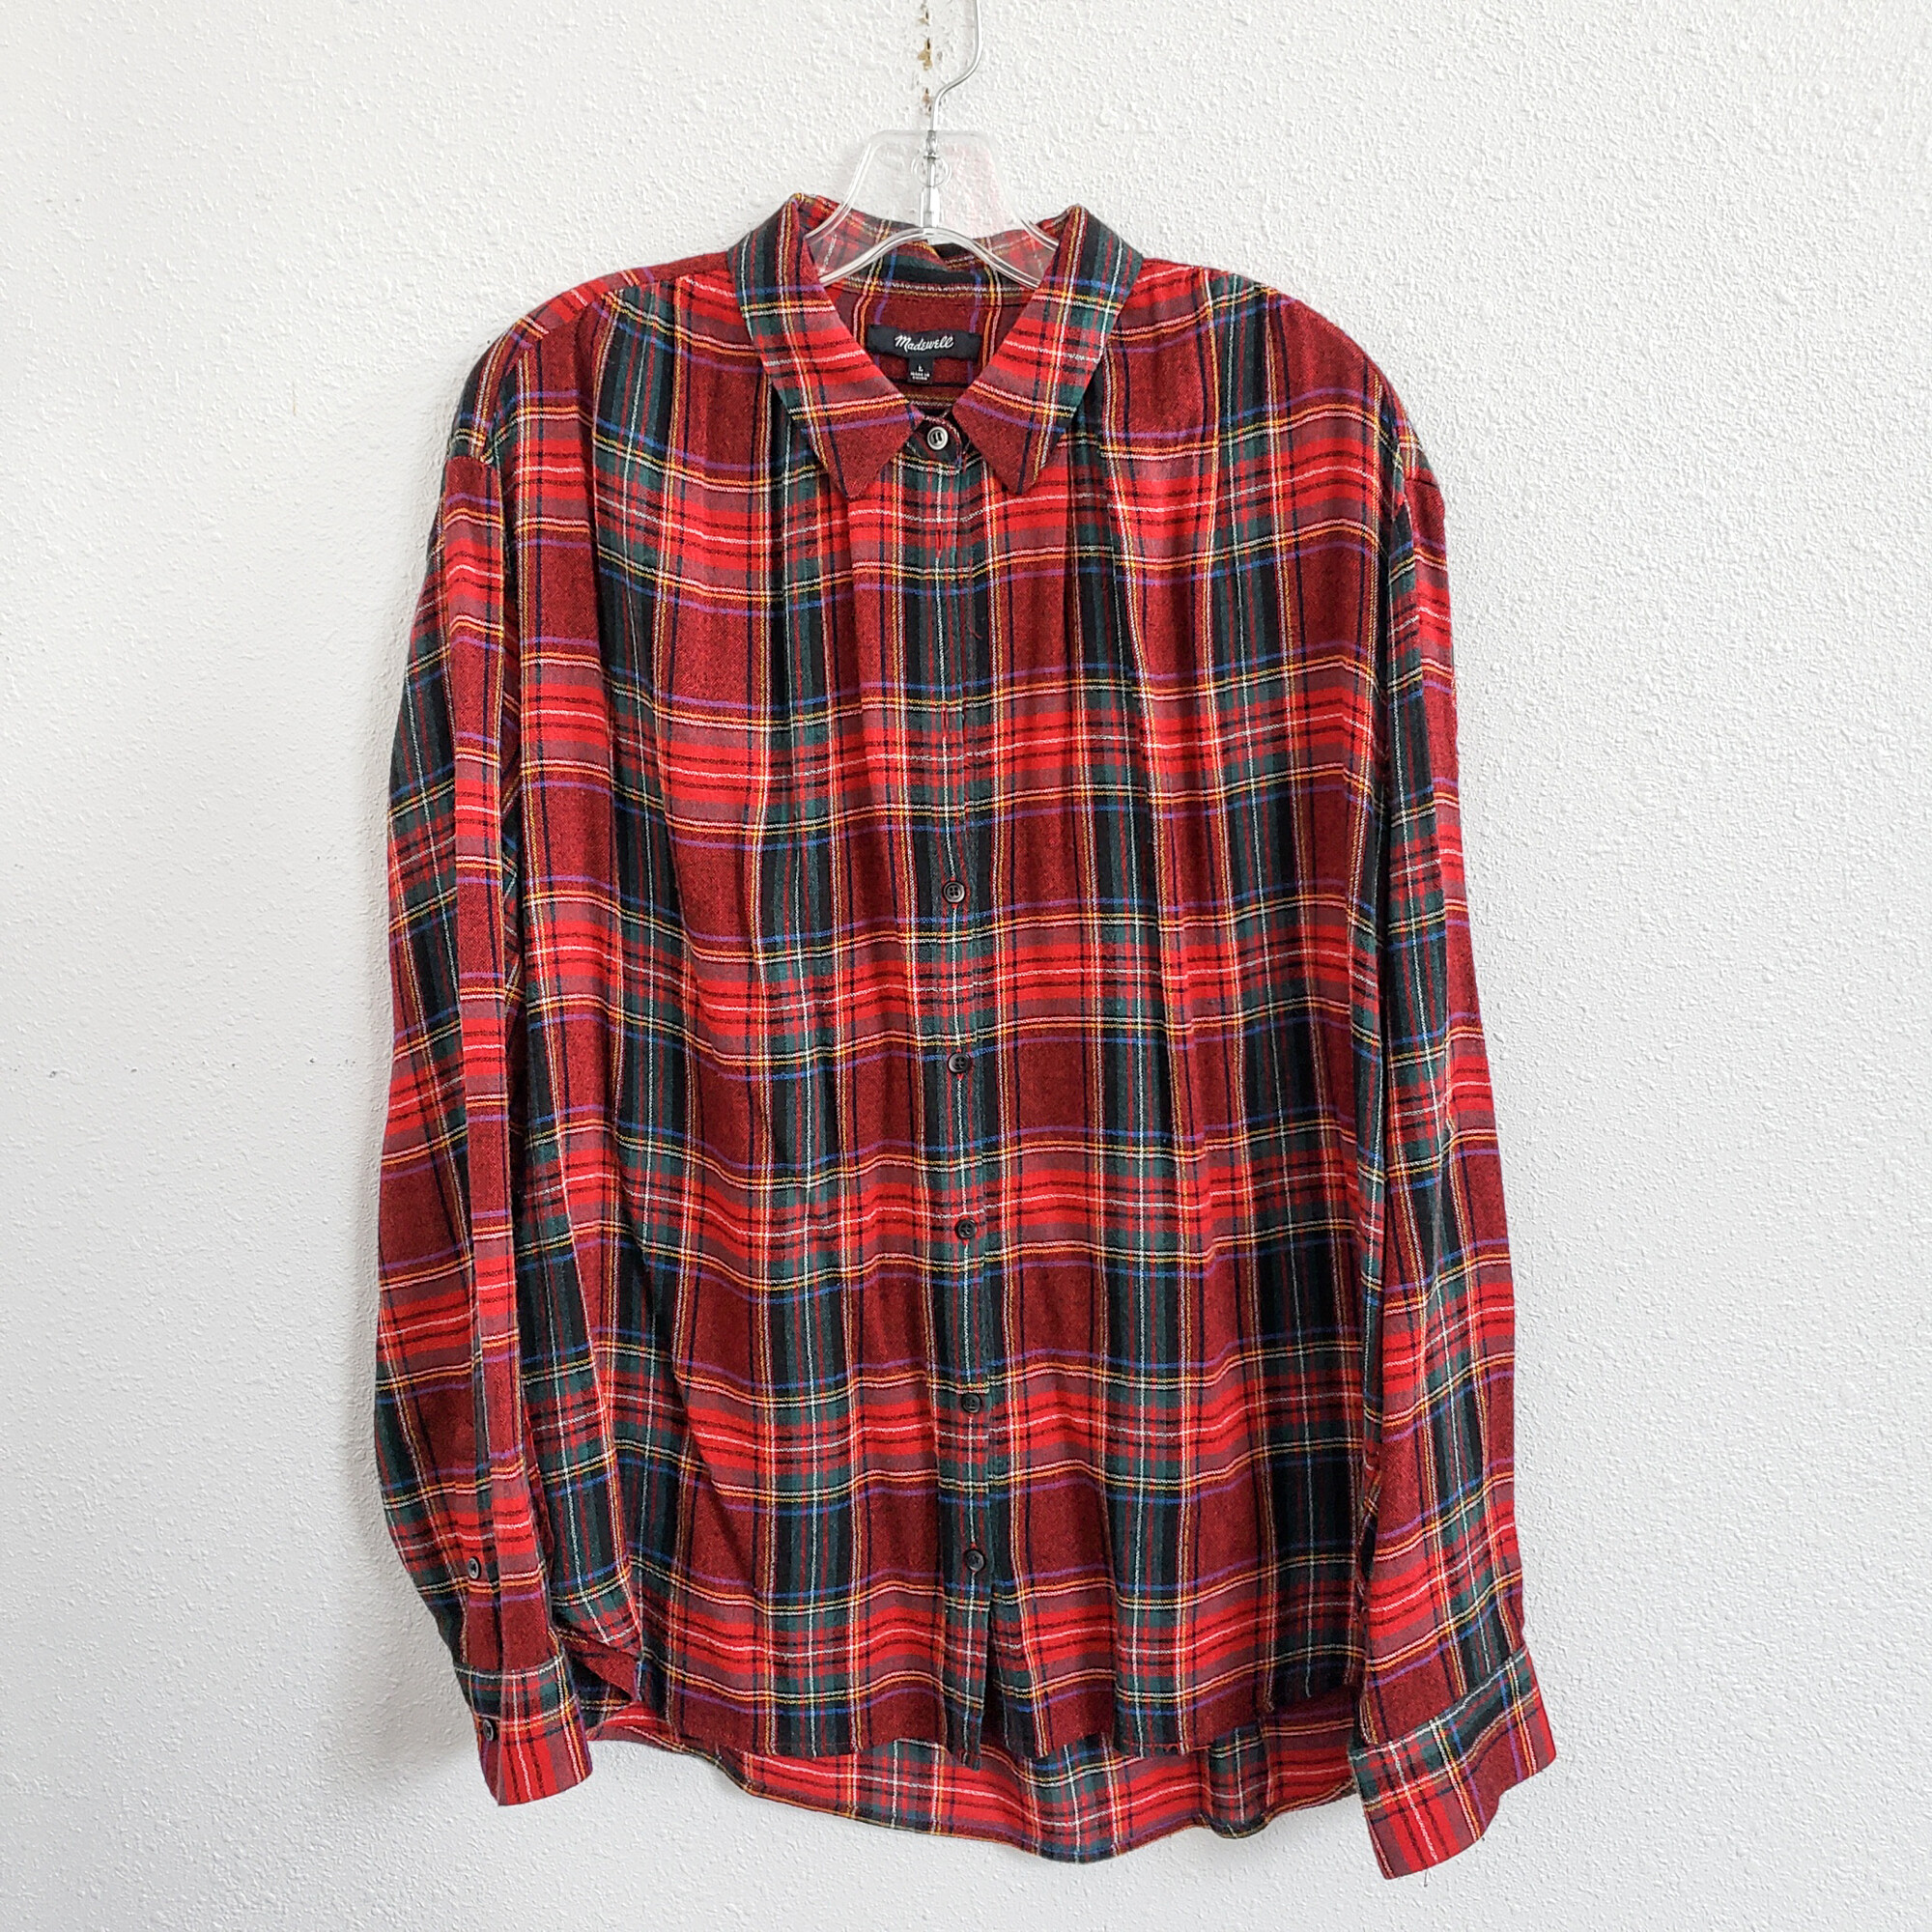 Madewell Plaid
Red and black plaid
Size: Large